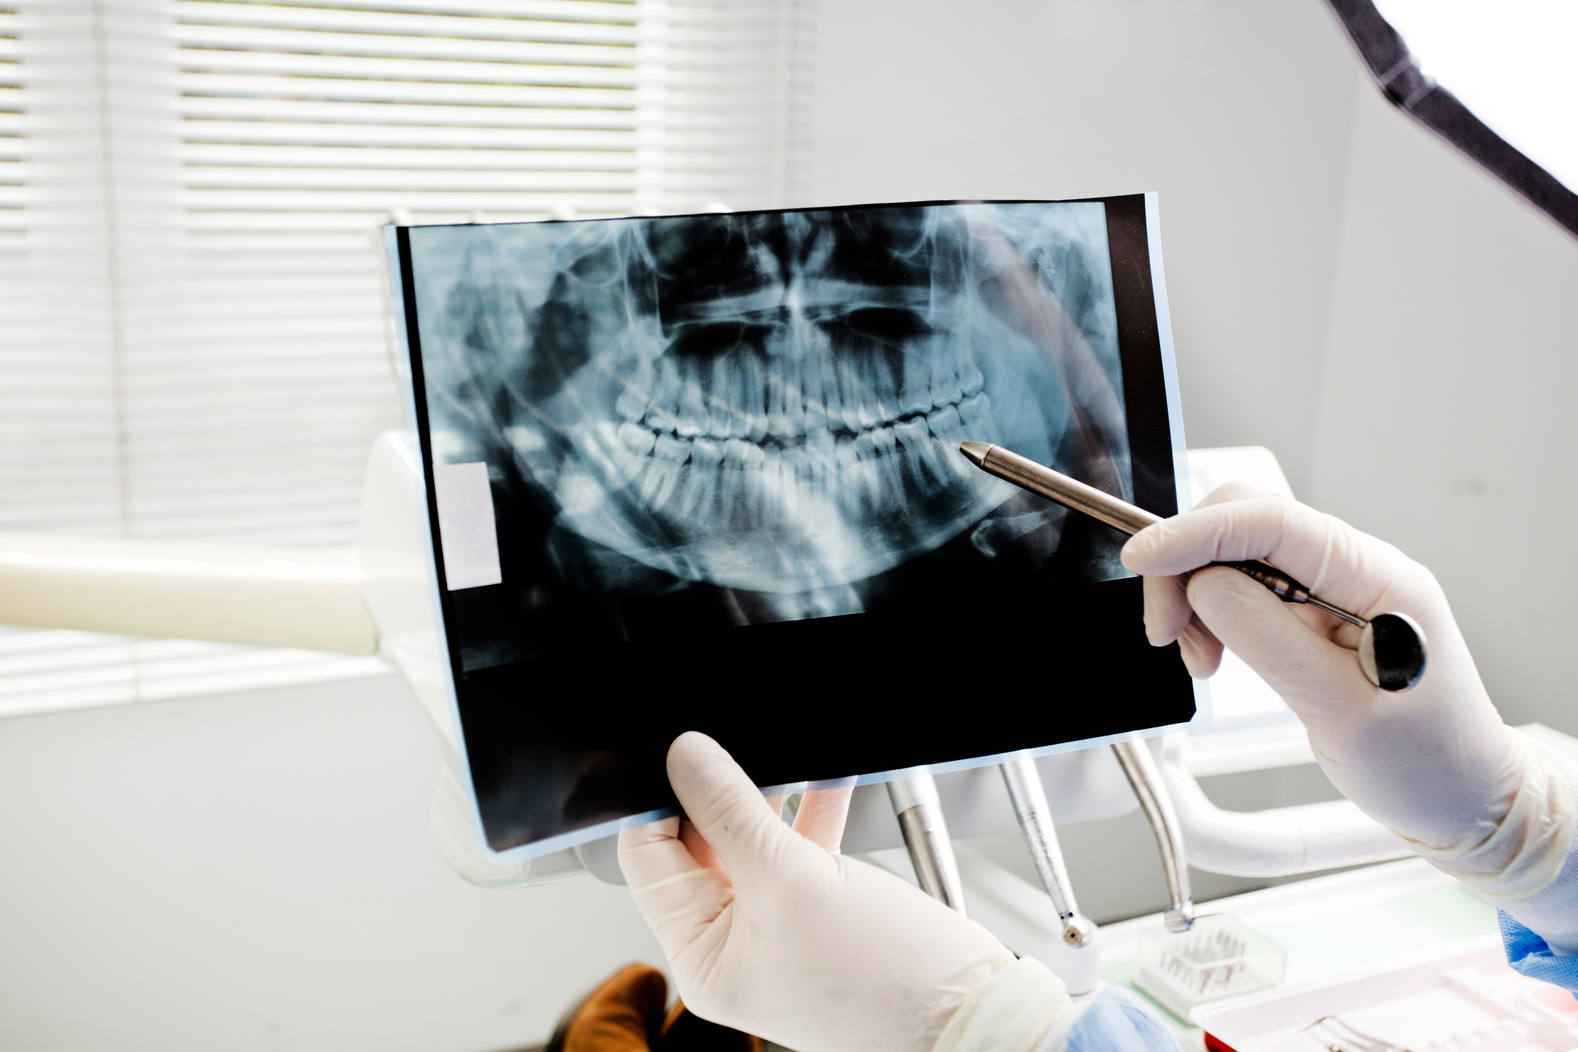 dental doctor, oral x-ray exams (oral radiography), dental clinic background